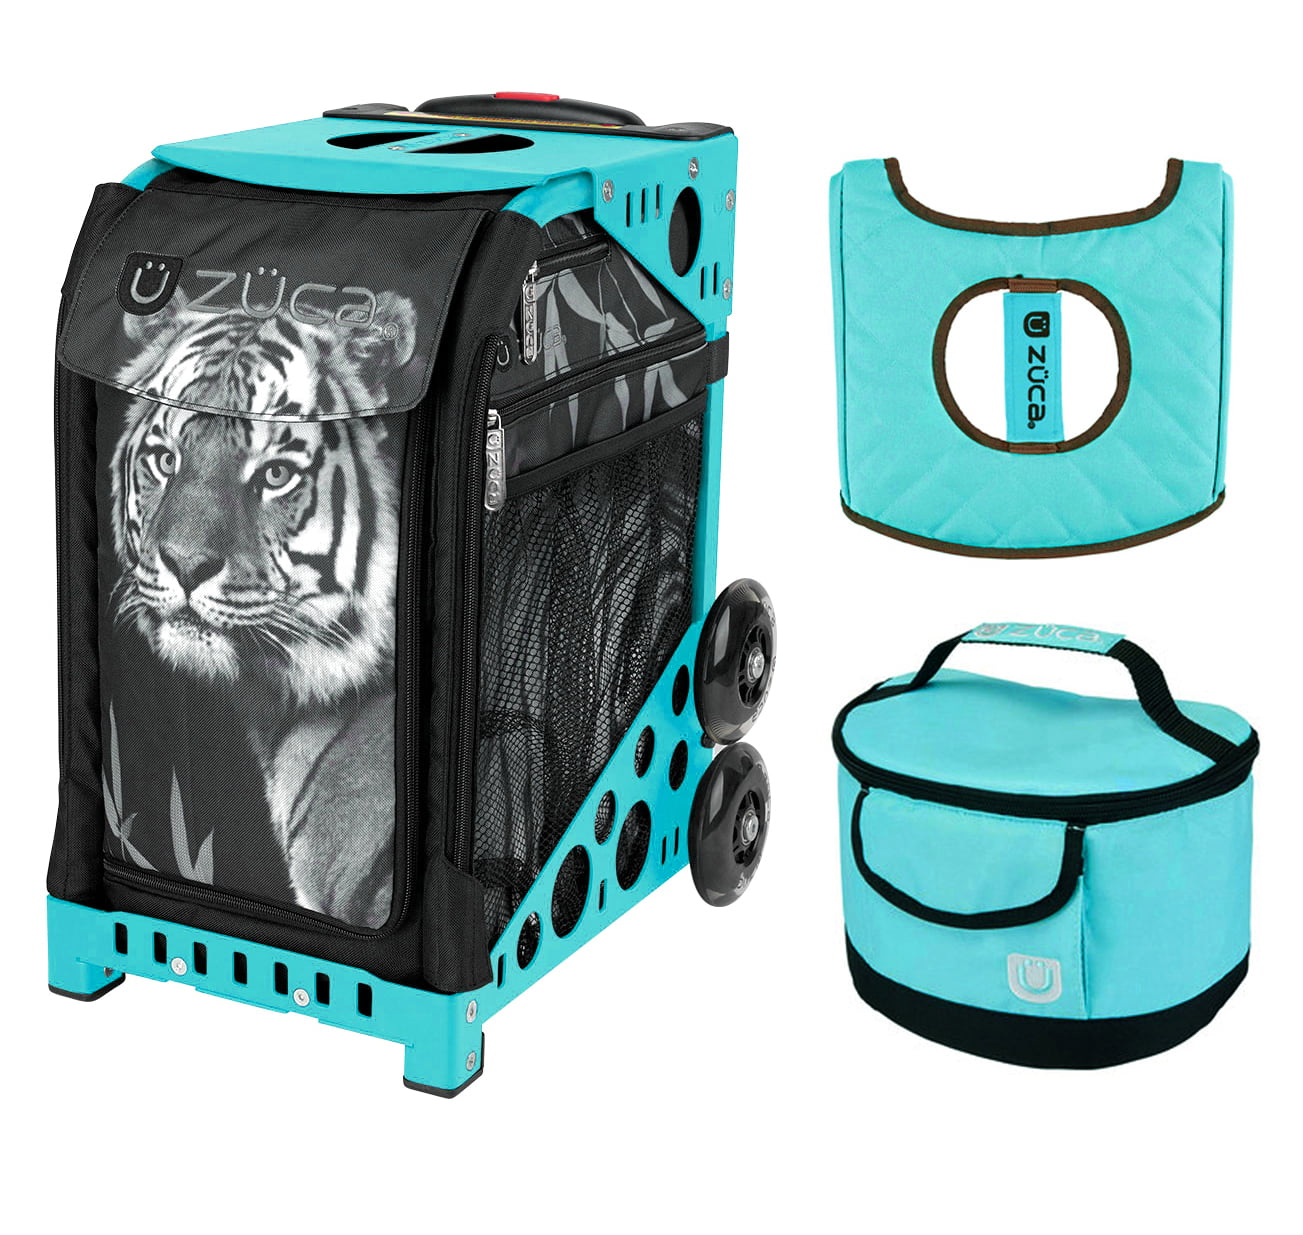 Zuca Bag TIGER Sport Insert and Green Frame GIFT Lunchbox & Seat Cushion 